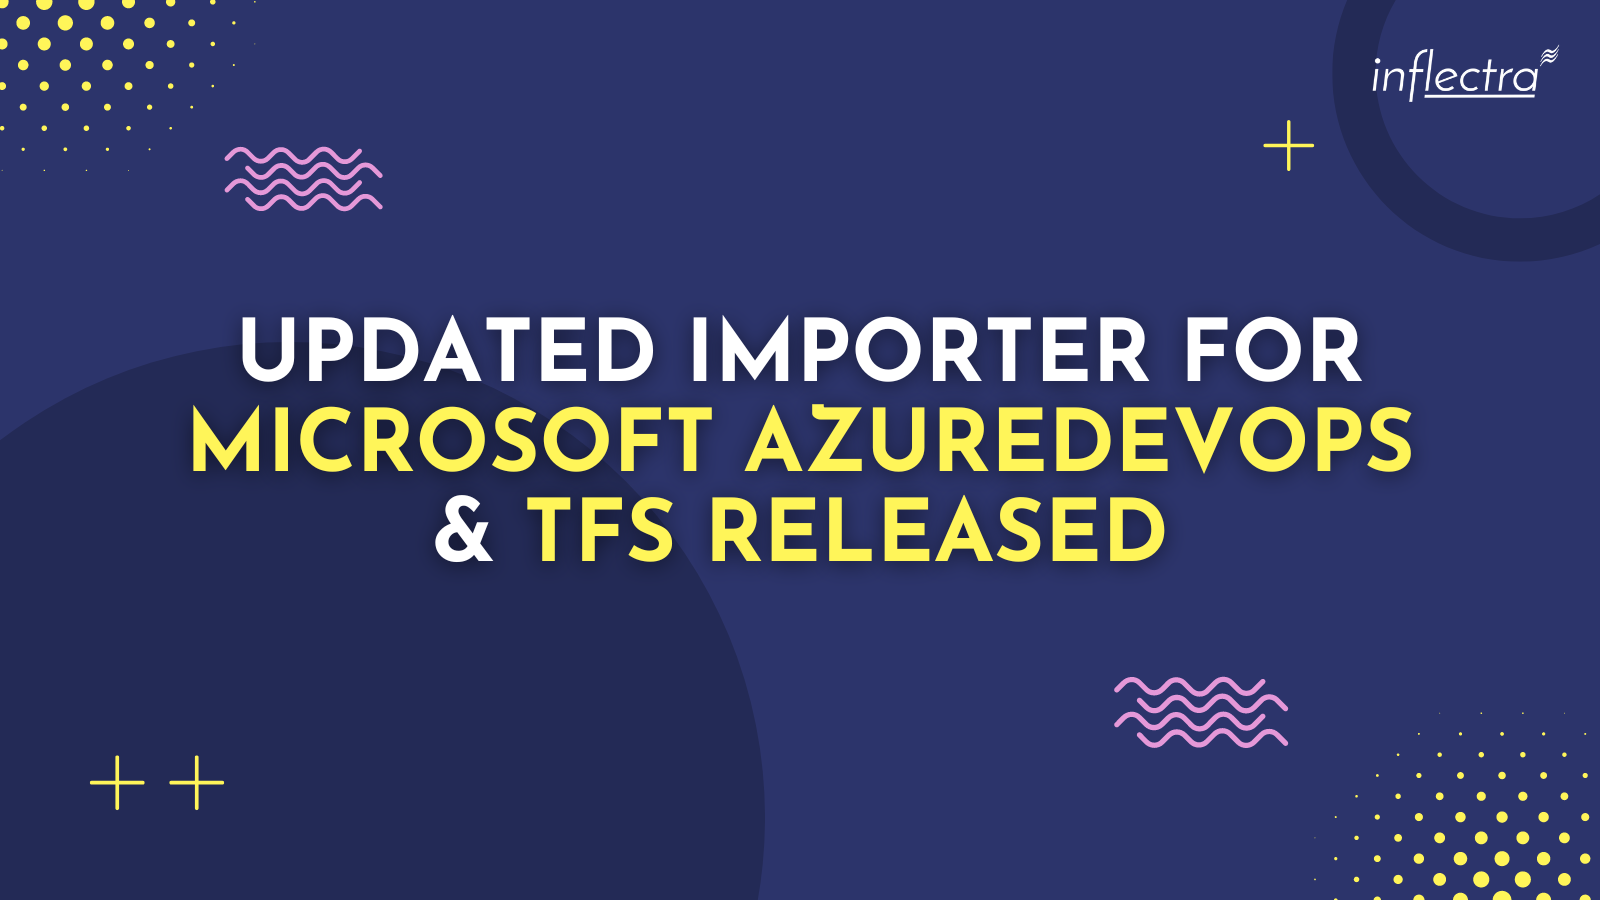 updated-importer-for-microsoft-azuredevops-and-tfs-released-image